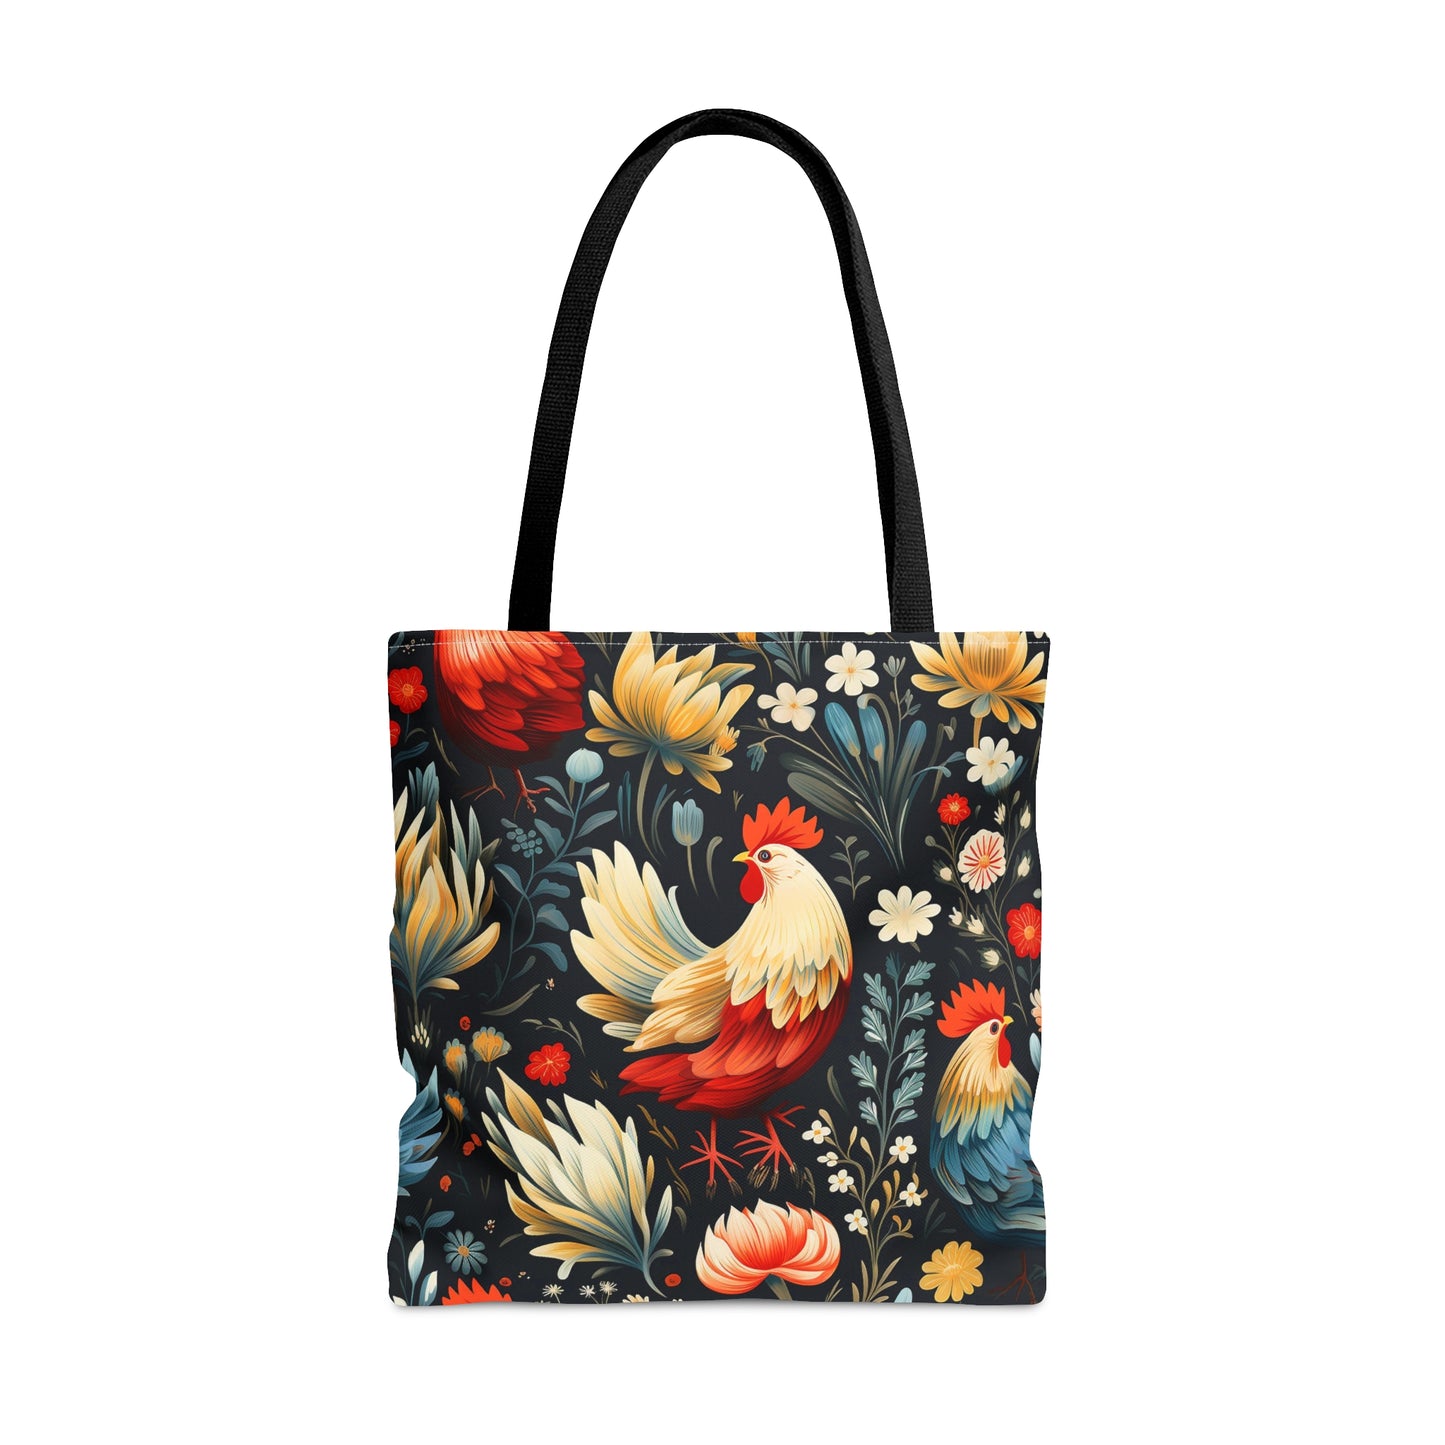 Rooster Tote Bag